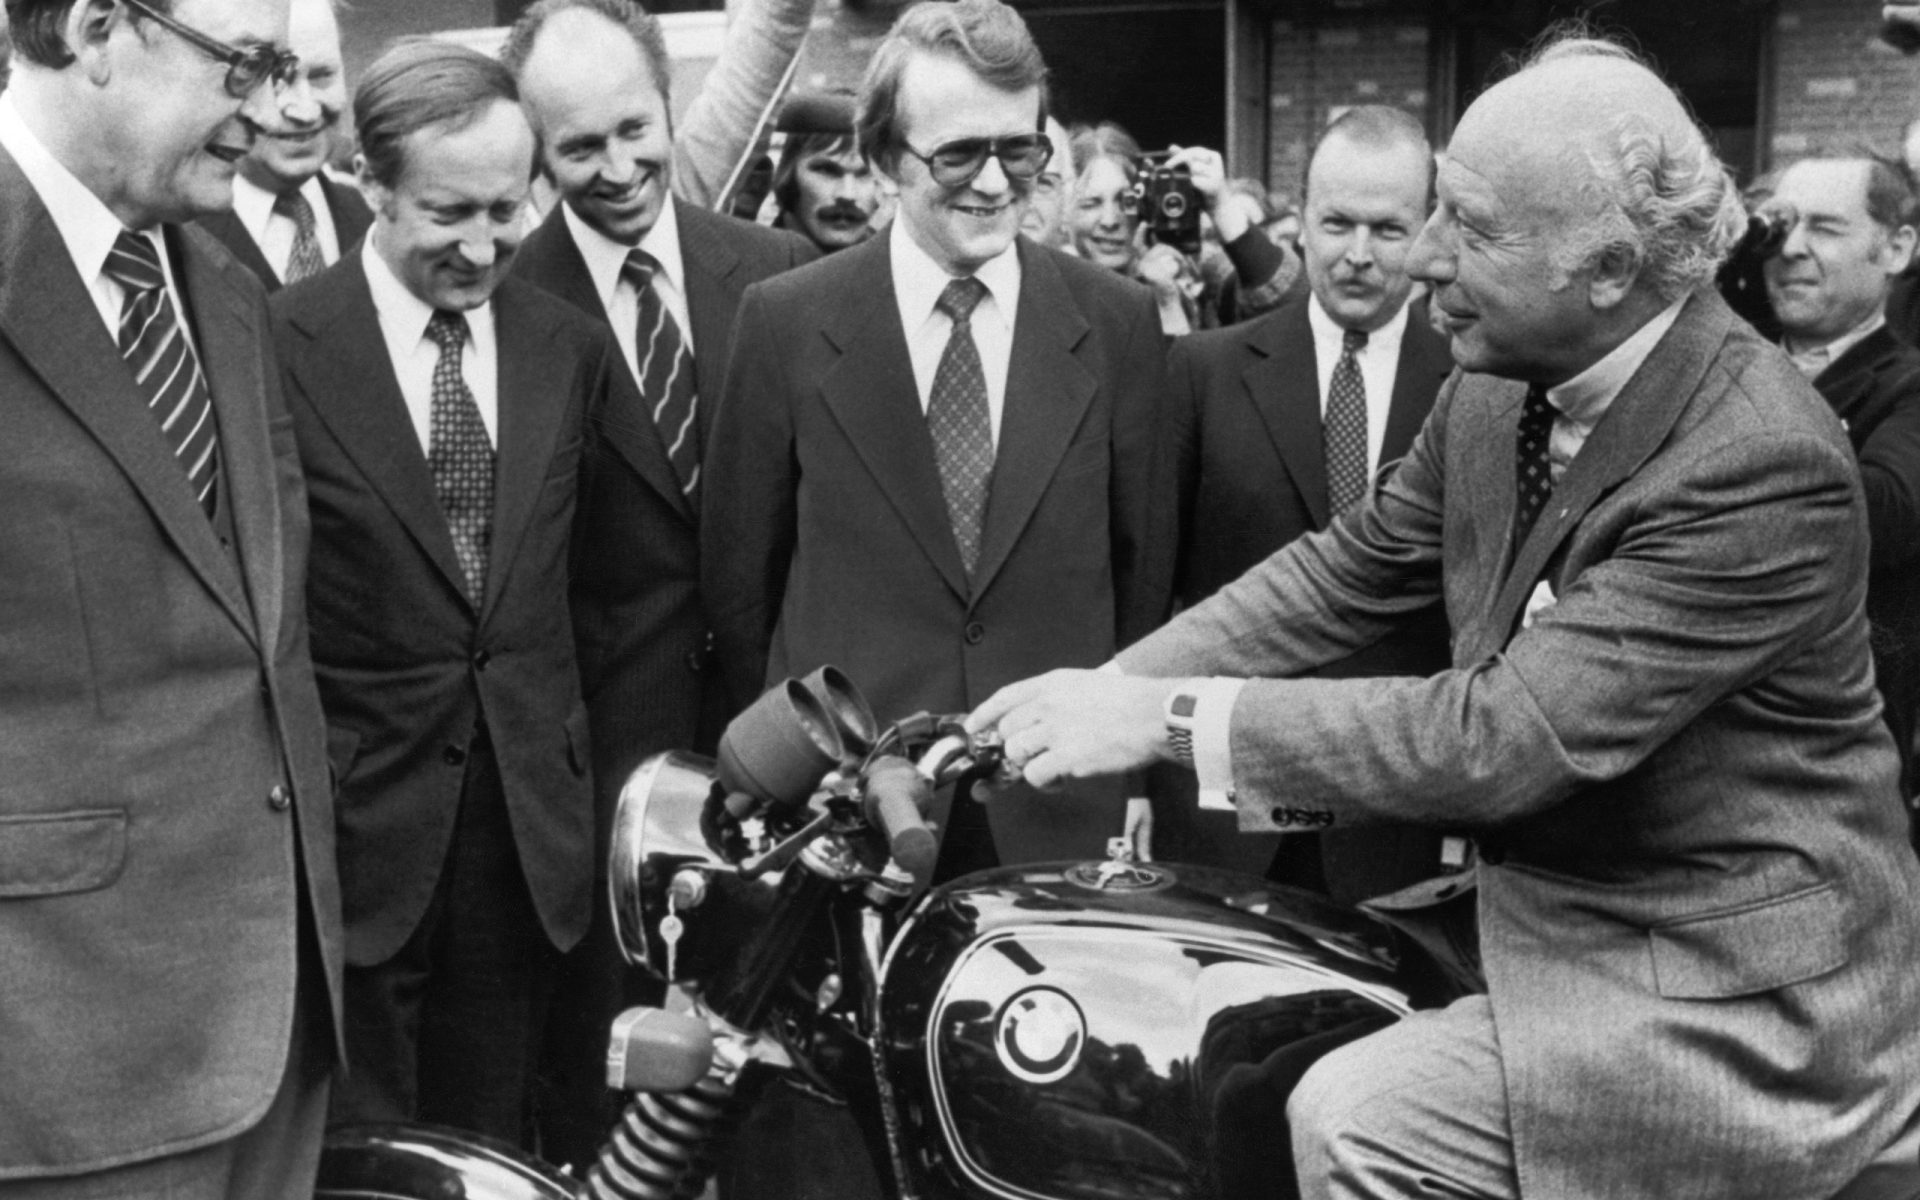 Walter Scheel visits BMW to celebrate the 500,000th BMW motorcycle